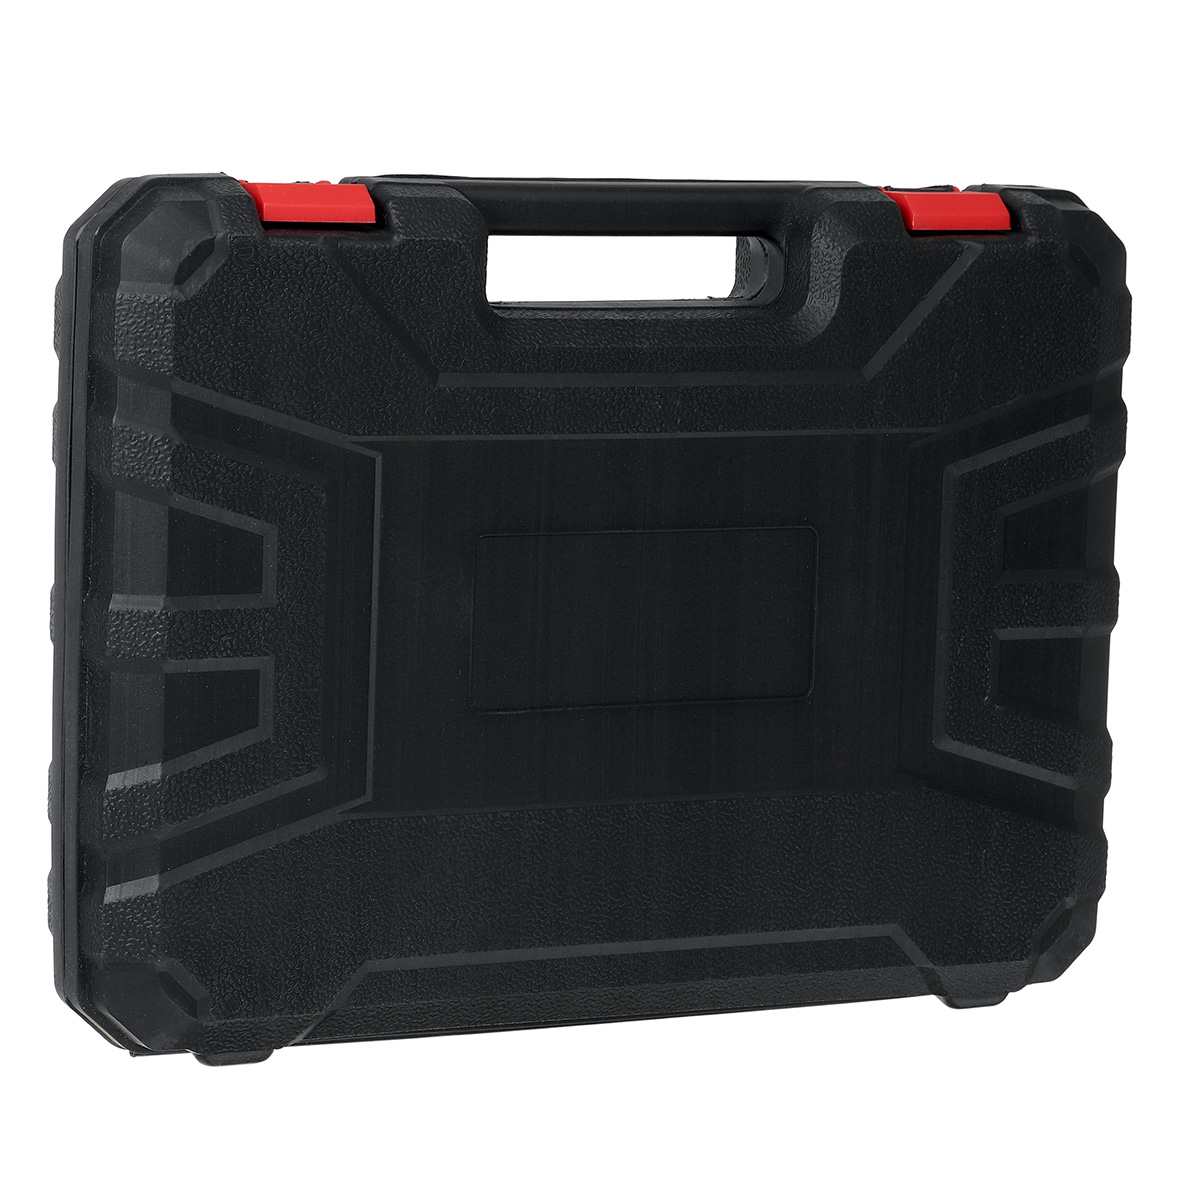 105Pcs-Hardware-Tools-Kit-Screwdriver-Wrench-w-Storage-Box-Applied-To-Home-Outdoors-Car-1708391-10